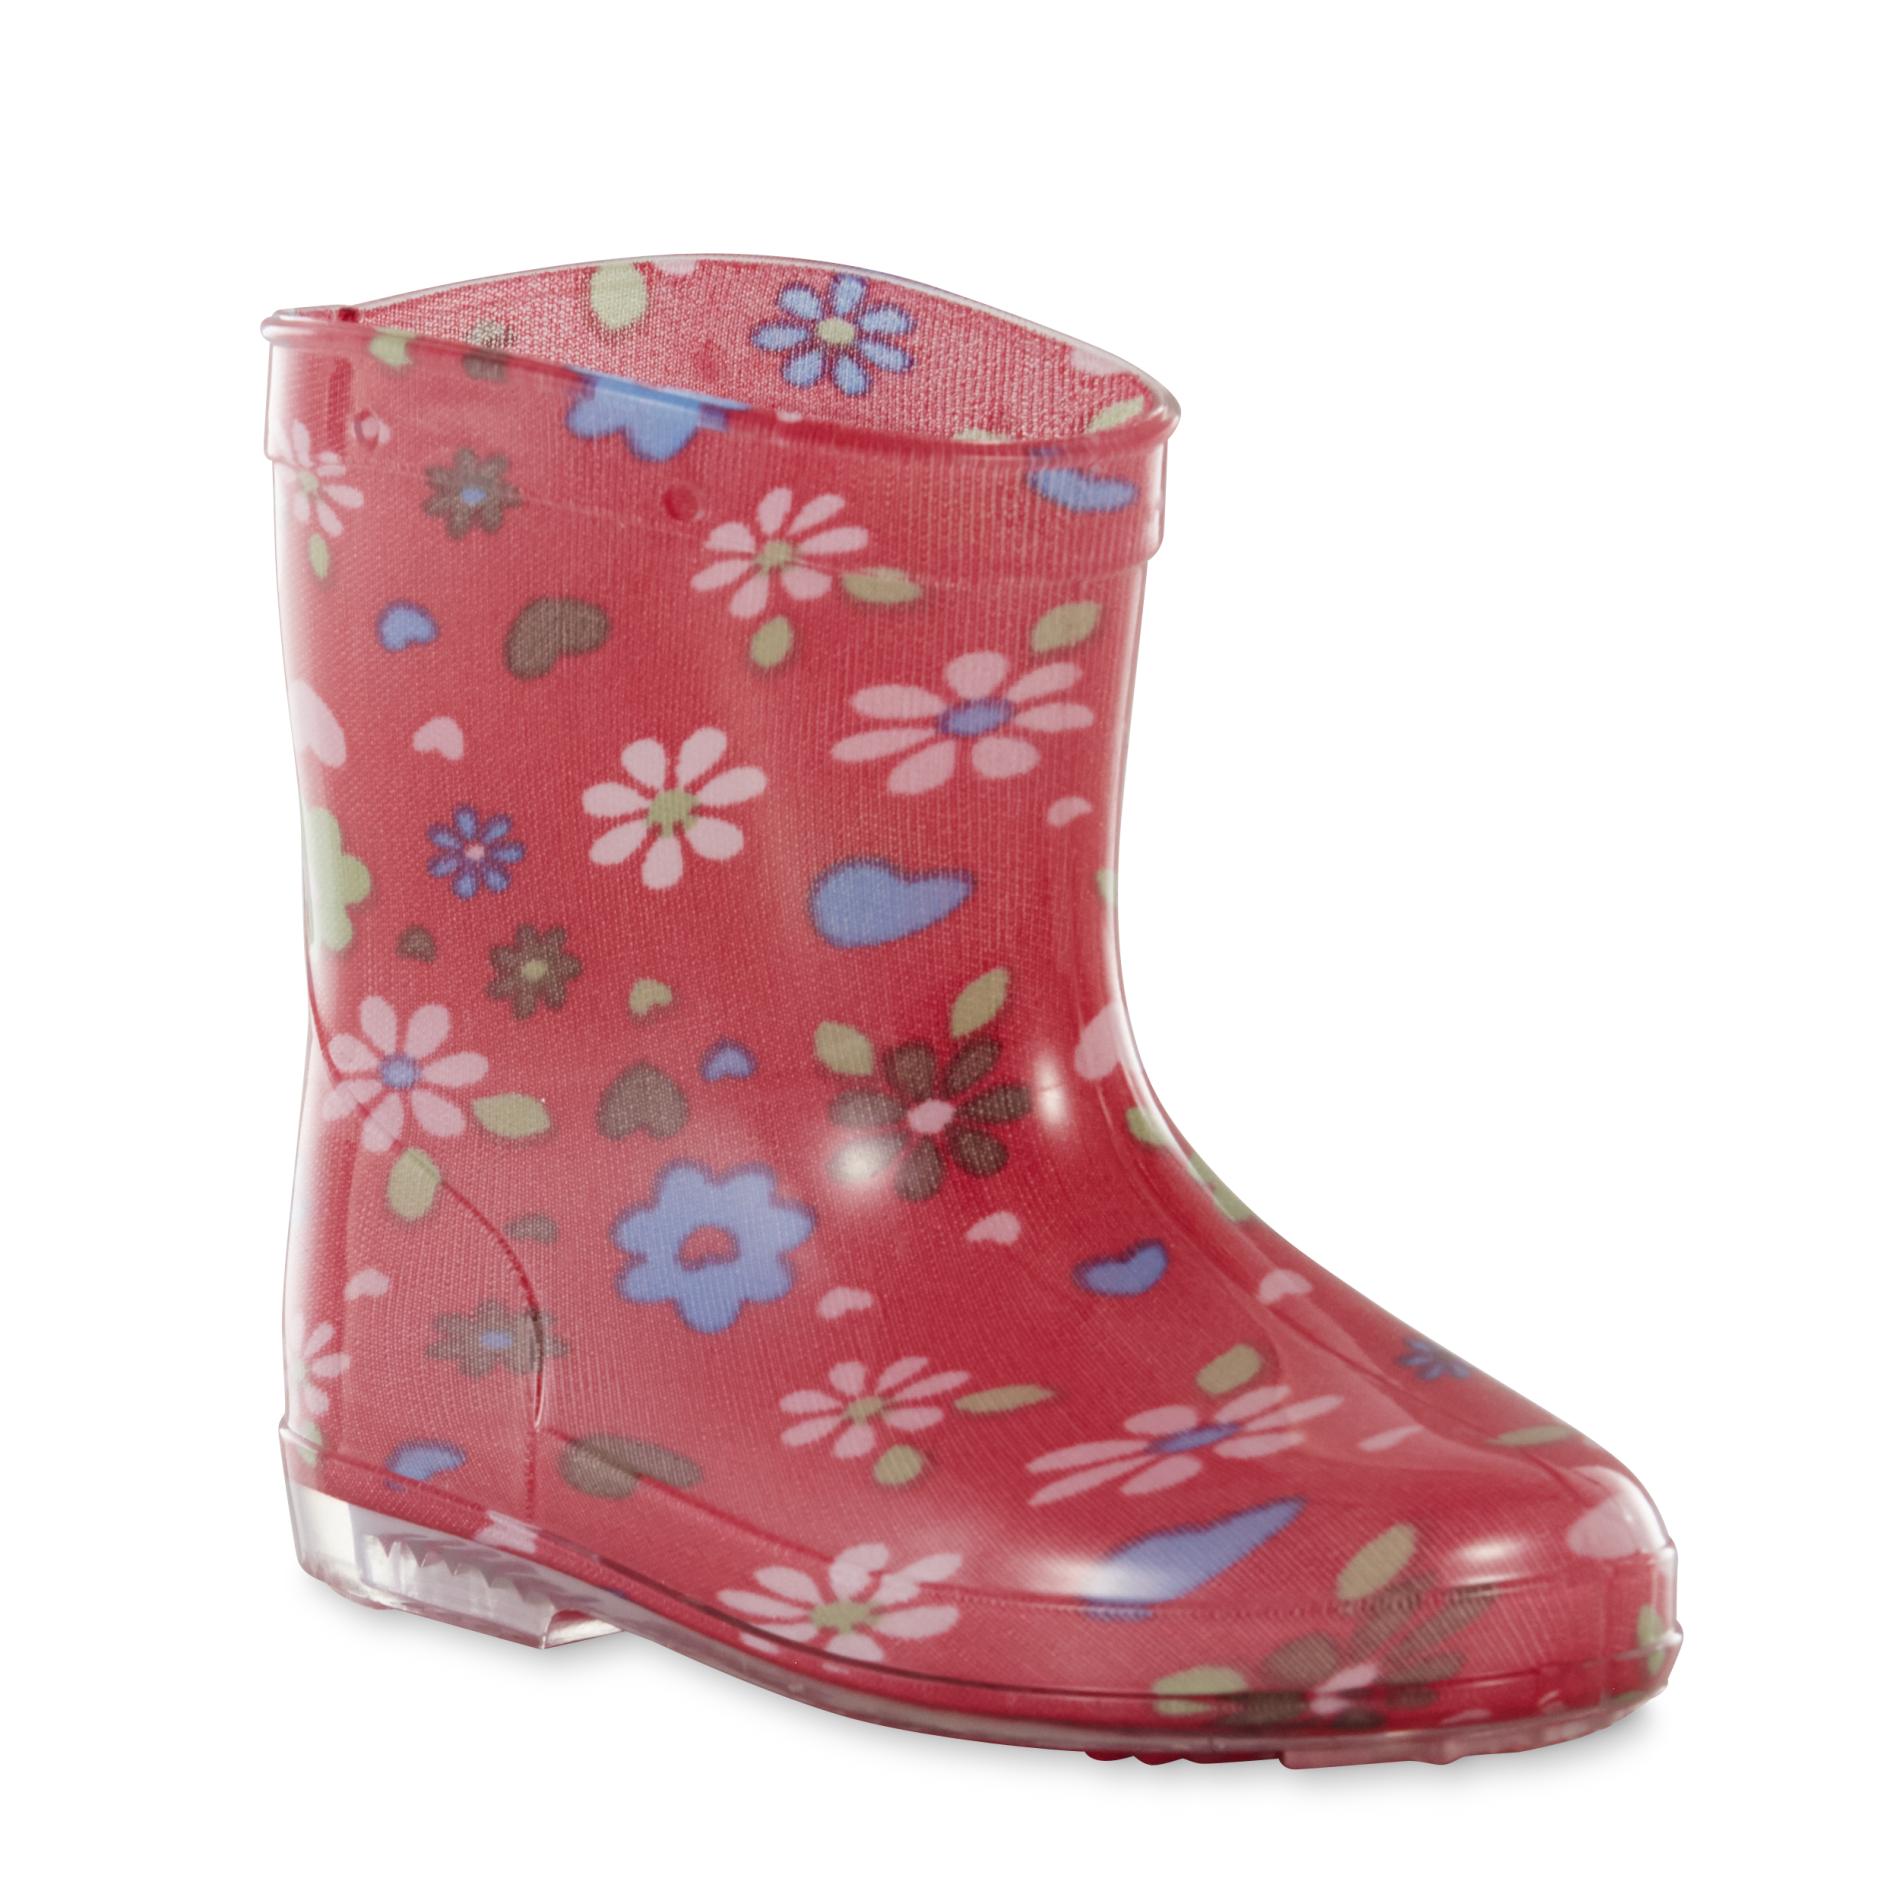 Personal Identity Toddler Girl's Fleur Pink/Floral Rain Boot